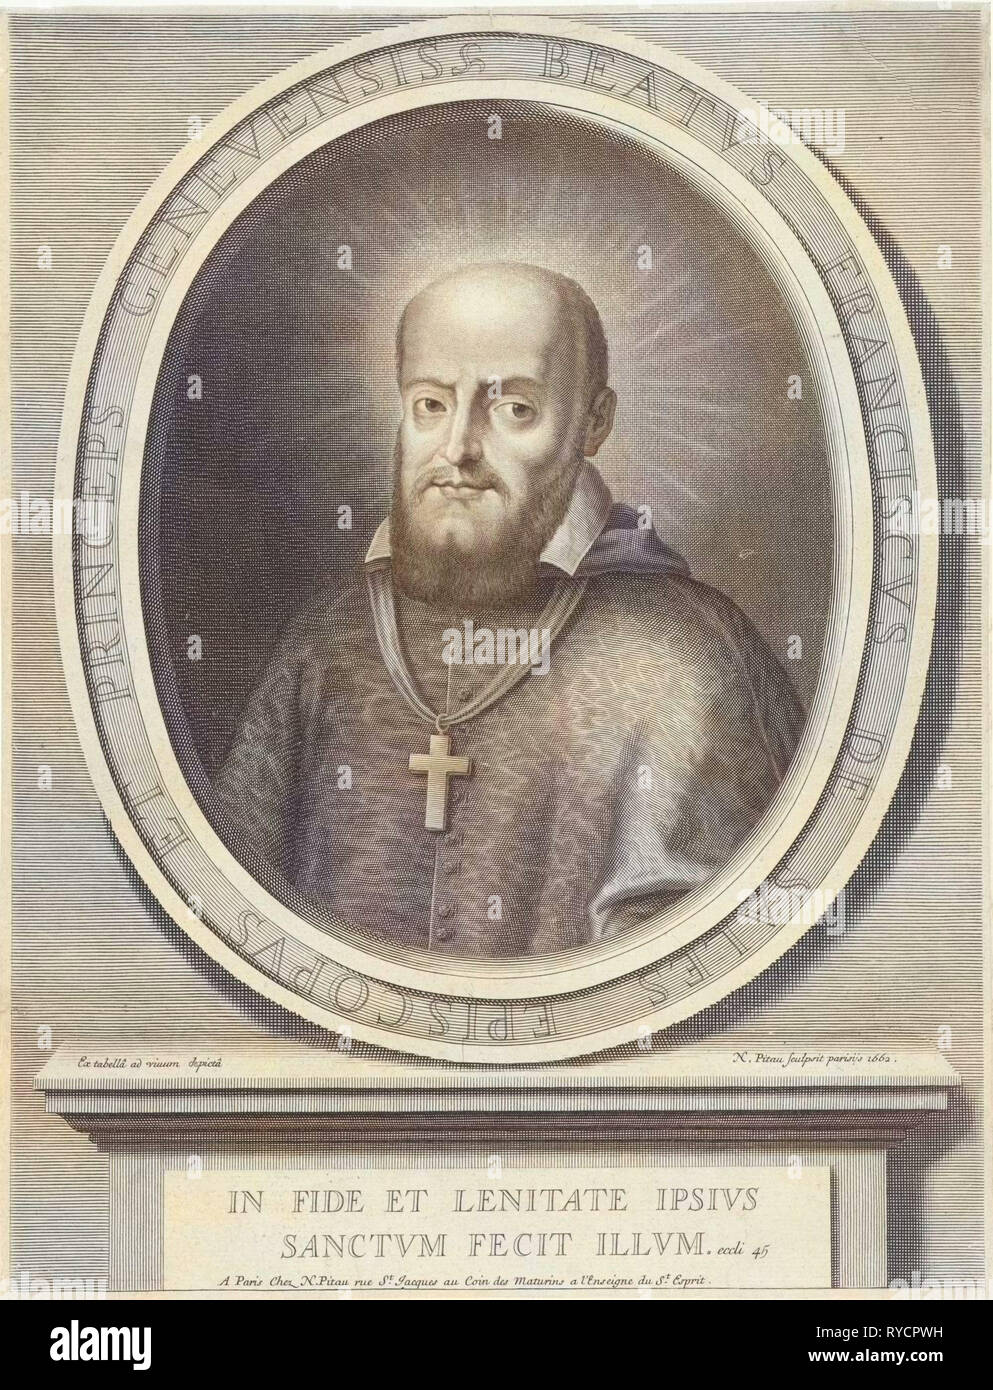 Portrait of St. Francis de Sales, a halo behind his head, he was bishop of Geneva and Annecy, on the pedestal a Bible quote, print maker: Nicolas Pitau (I) (mentioned on object), Dating 1662 Stock Photo